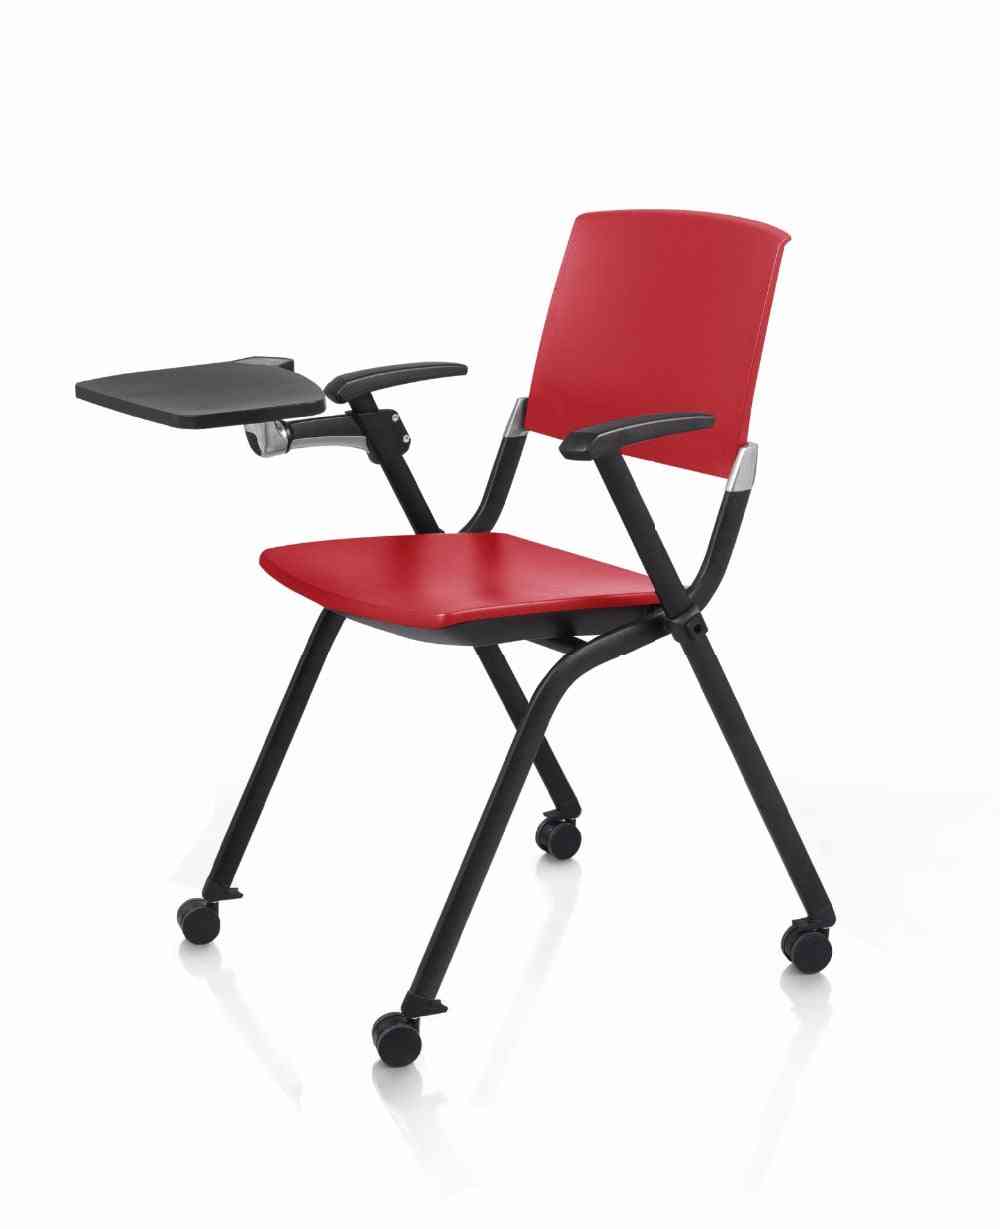 Folding Chair With Writing Board For Office, Home